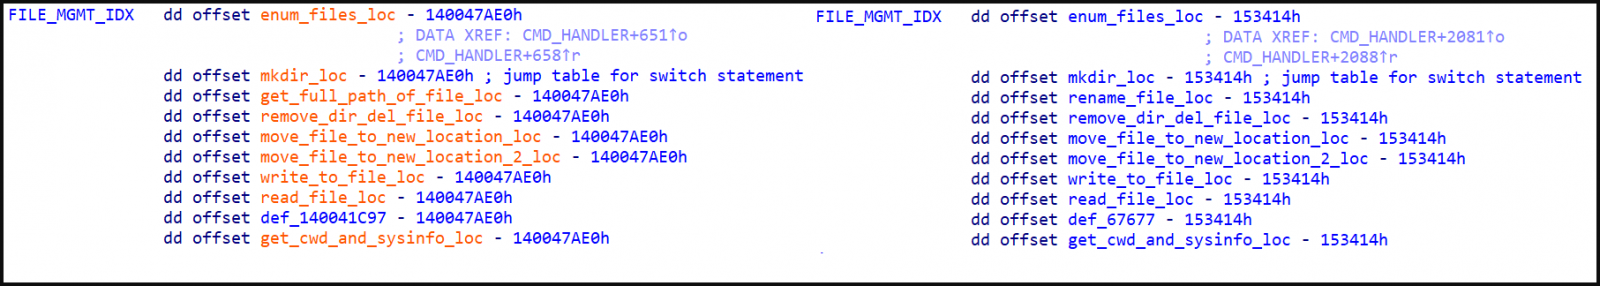 File management capabilities, EXE on the left, ELF on the right